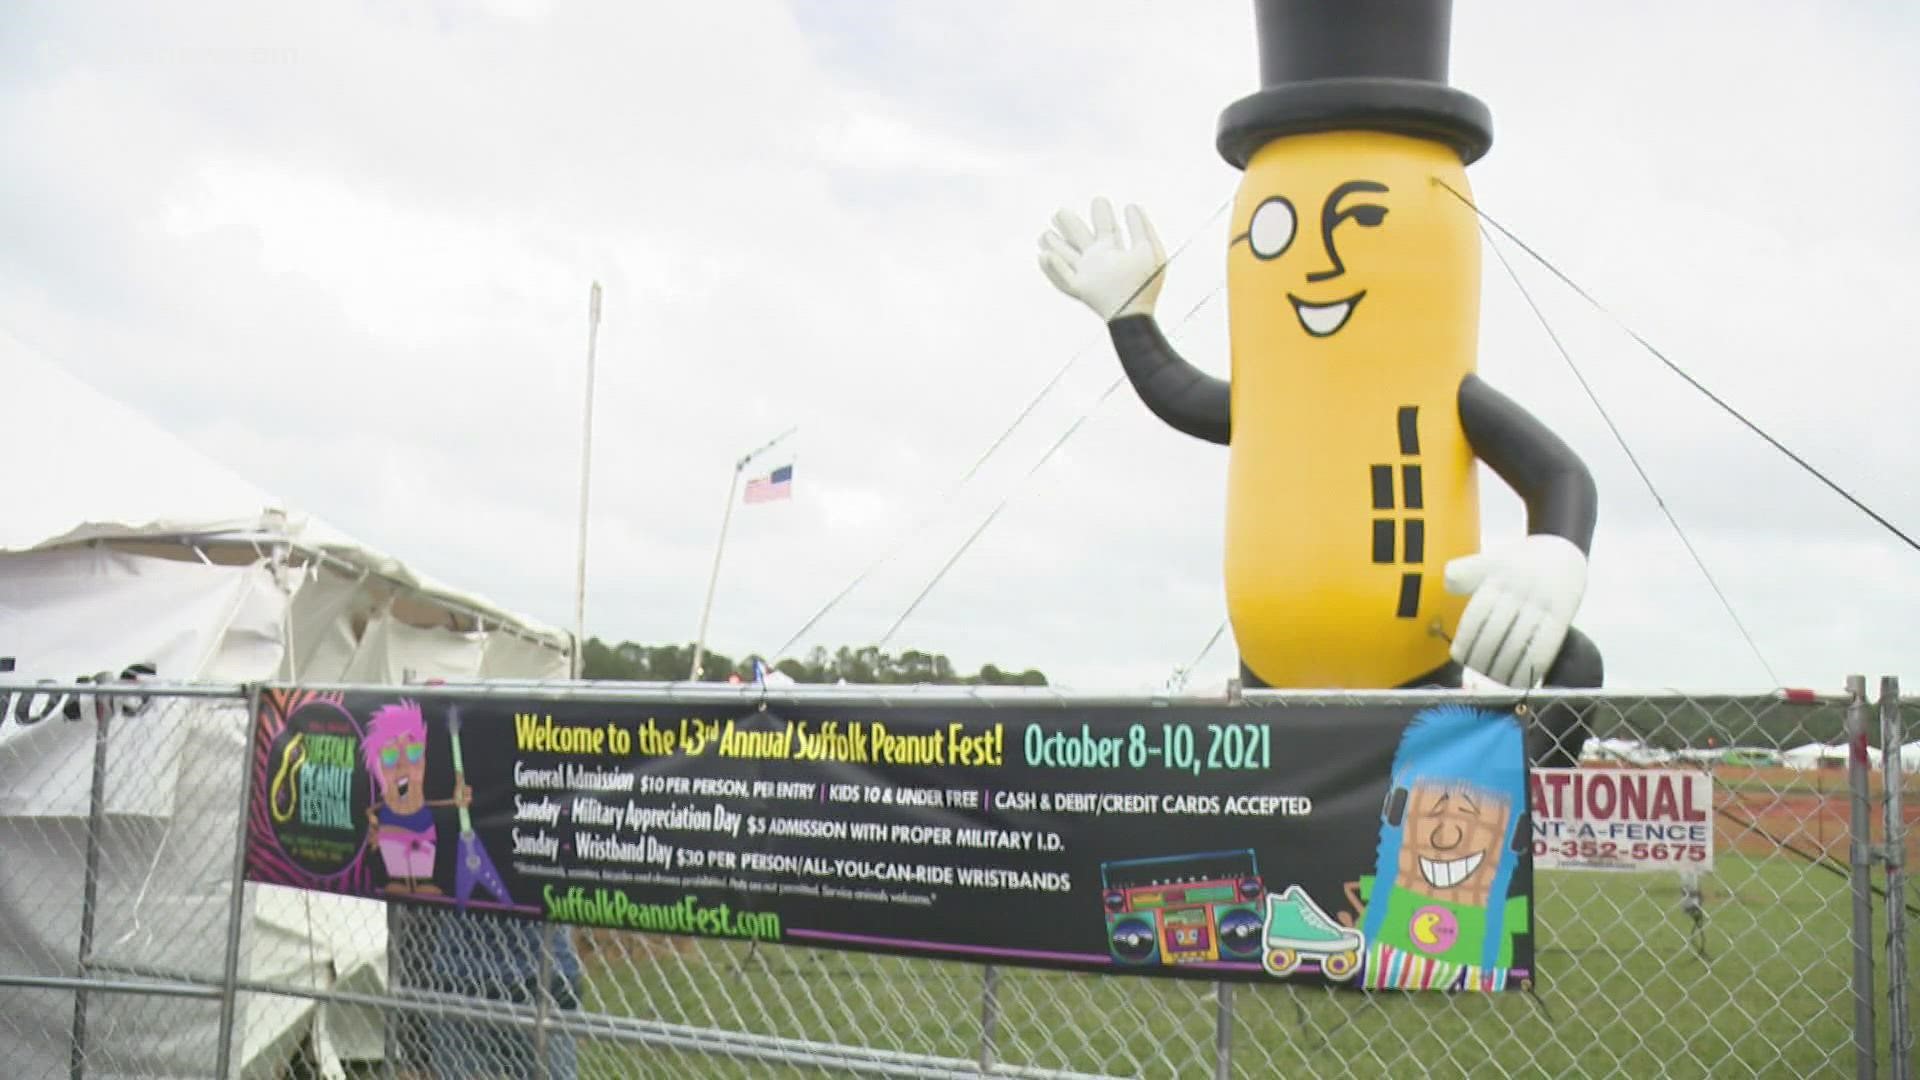 Sunday is the last day of the 43rd annual Suffolk Peanut Festival.